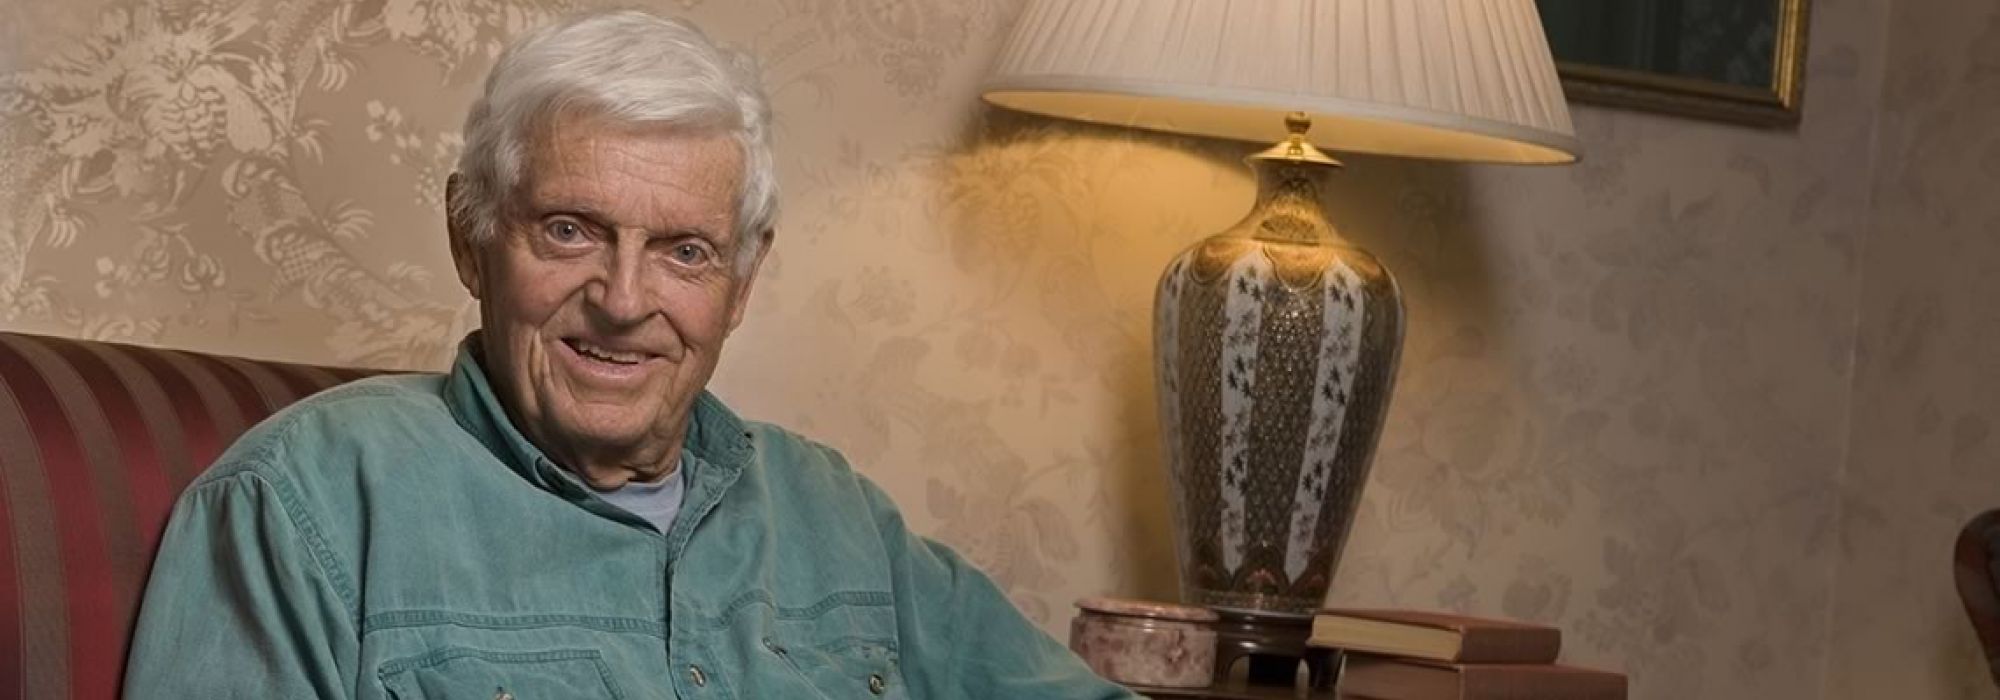 Alumnus Don Davis, smiling and wearing a green button down, sits on a couch with decorative wallpaper and lamp in the background.